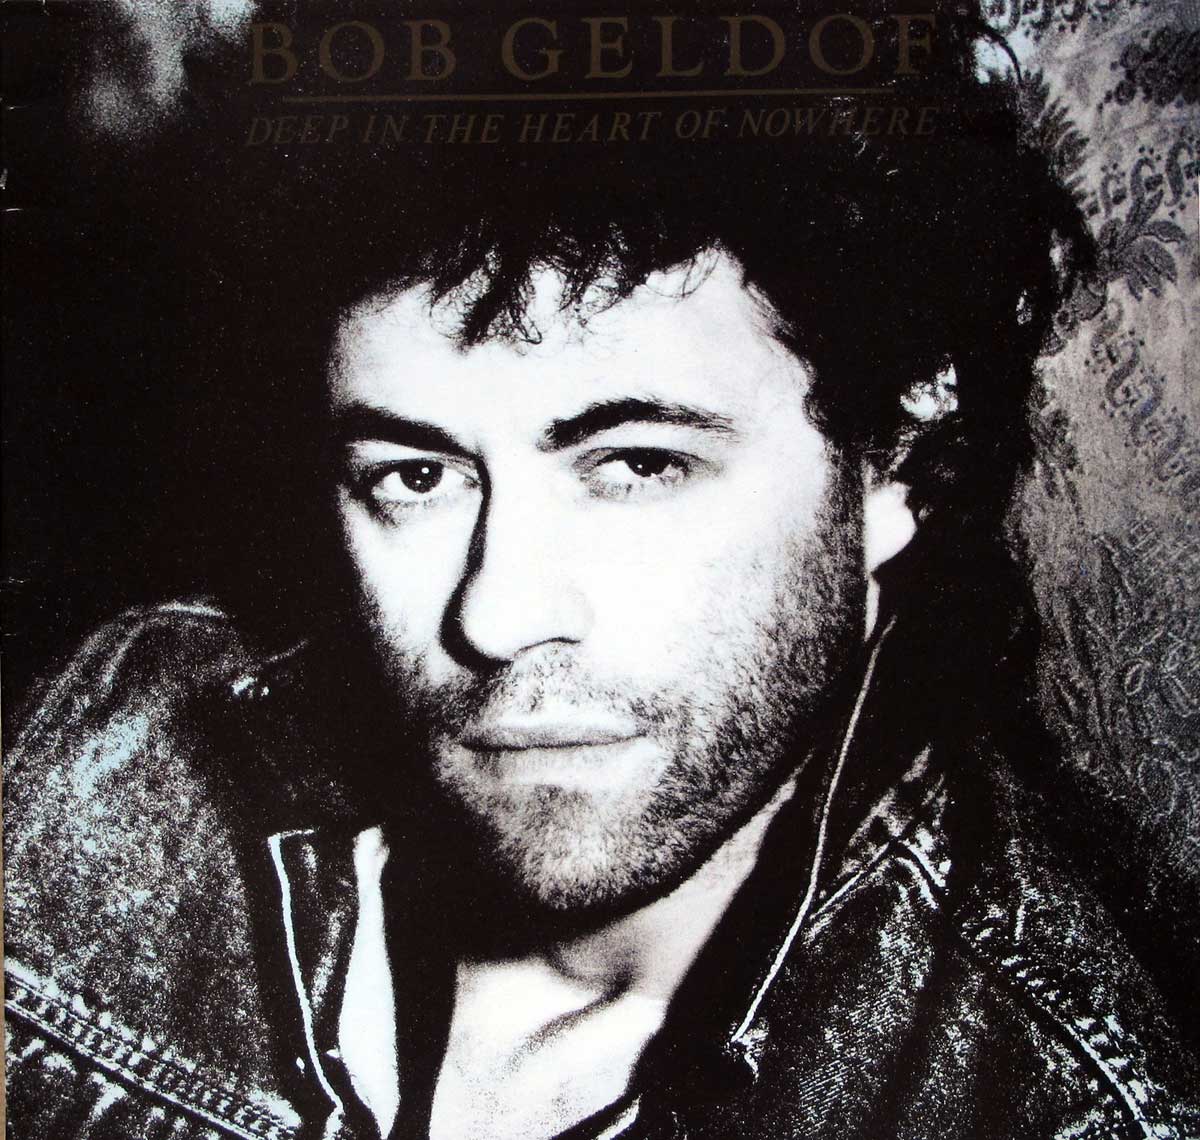 large album front cover photo of: BOB GELDOF DEEP IN THE HEART OF NOWHERE 